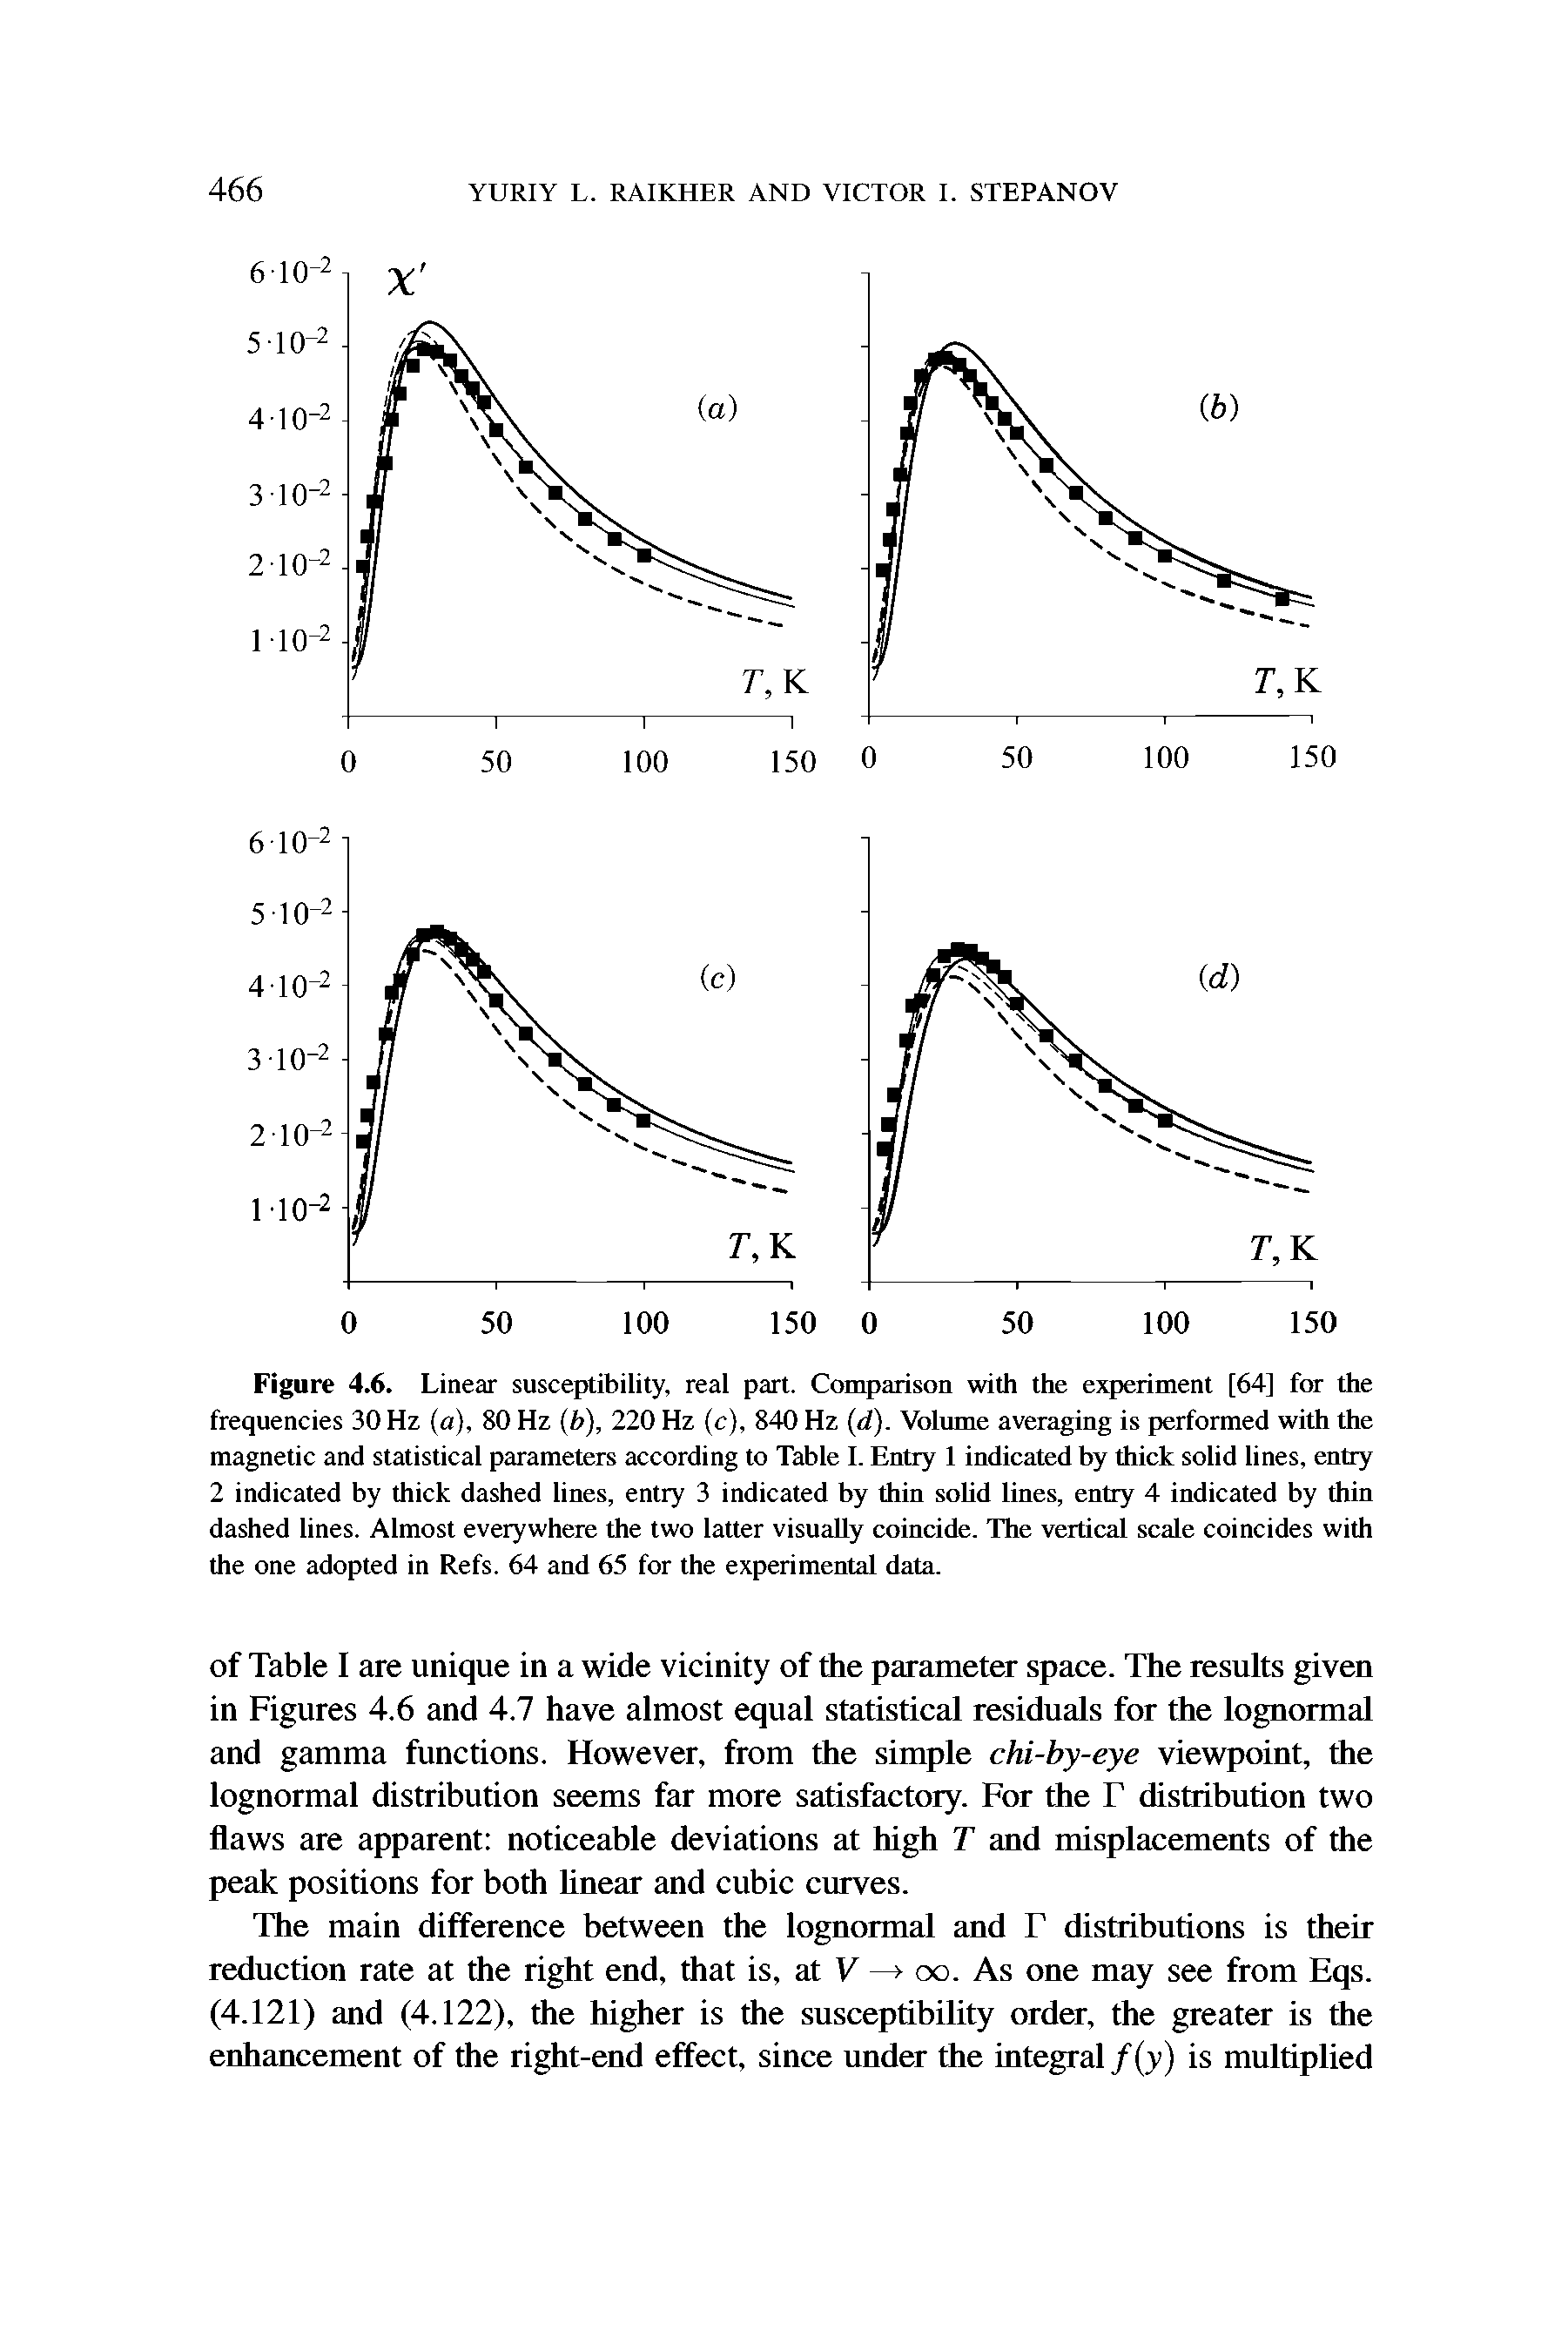 Figure 4.6. Linear susceptibility, real part. Comparison with the experiment [64] for the frequencies 30 Hz (a), 80 Hz (b), 220 Hz (c), 840 Hz (d). Volume averaging is performed with the magnetic and statistical parameters according to Table I. Entry 1 indicated by thick solid lines, entry 2 indicated by thick dashed lines, entry 3 indicated by thin solid lines, entry 4 indicated by thin dashed lines. Almost everywhere the two latter visually coincide. The vertical scale coincides with the one adopted in Refs. 64 and 65 for the experimental data.